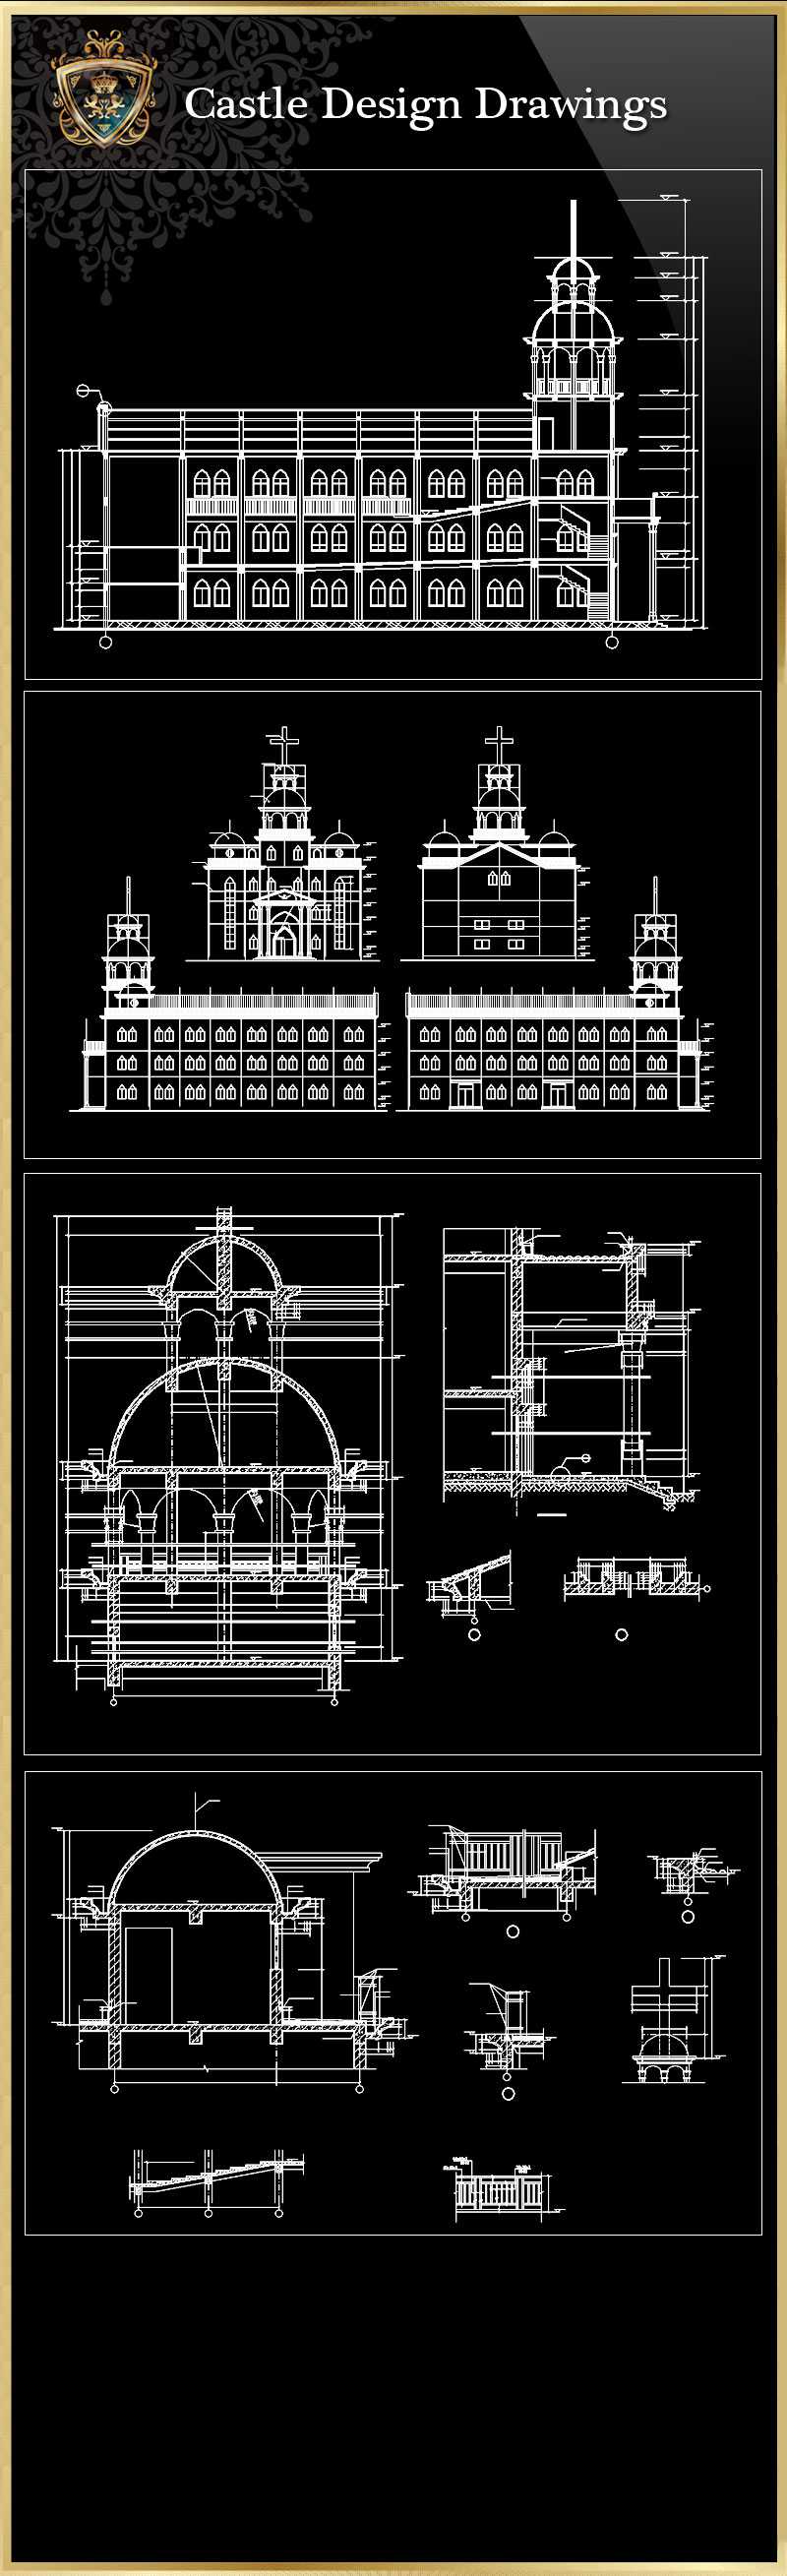 ★【Church Design 4】Download Luxury Architectural Design CAD Drawings--Over 20000+ High quality CAD Blocks and Drawings Download!